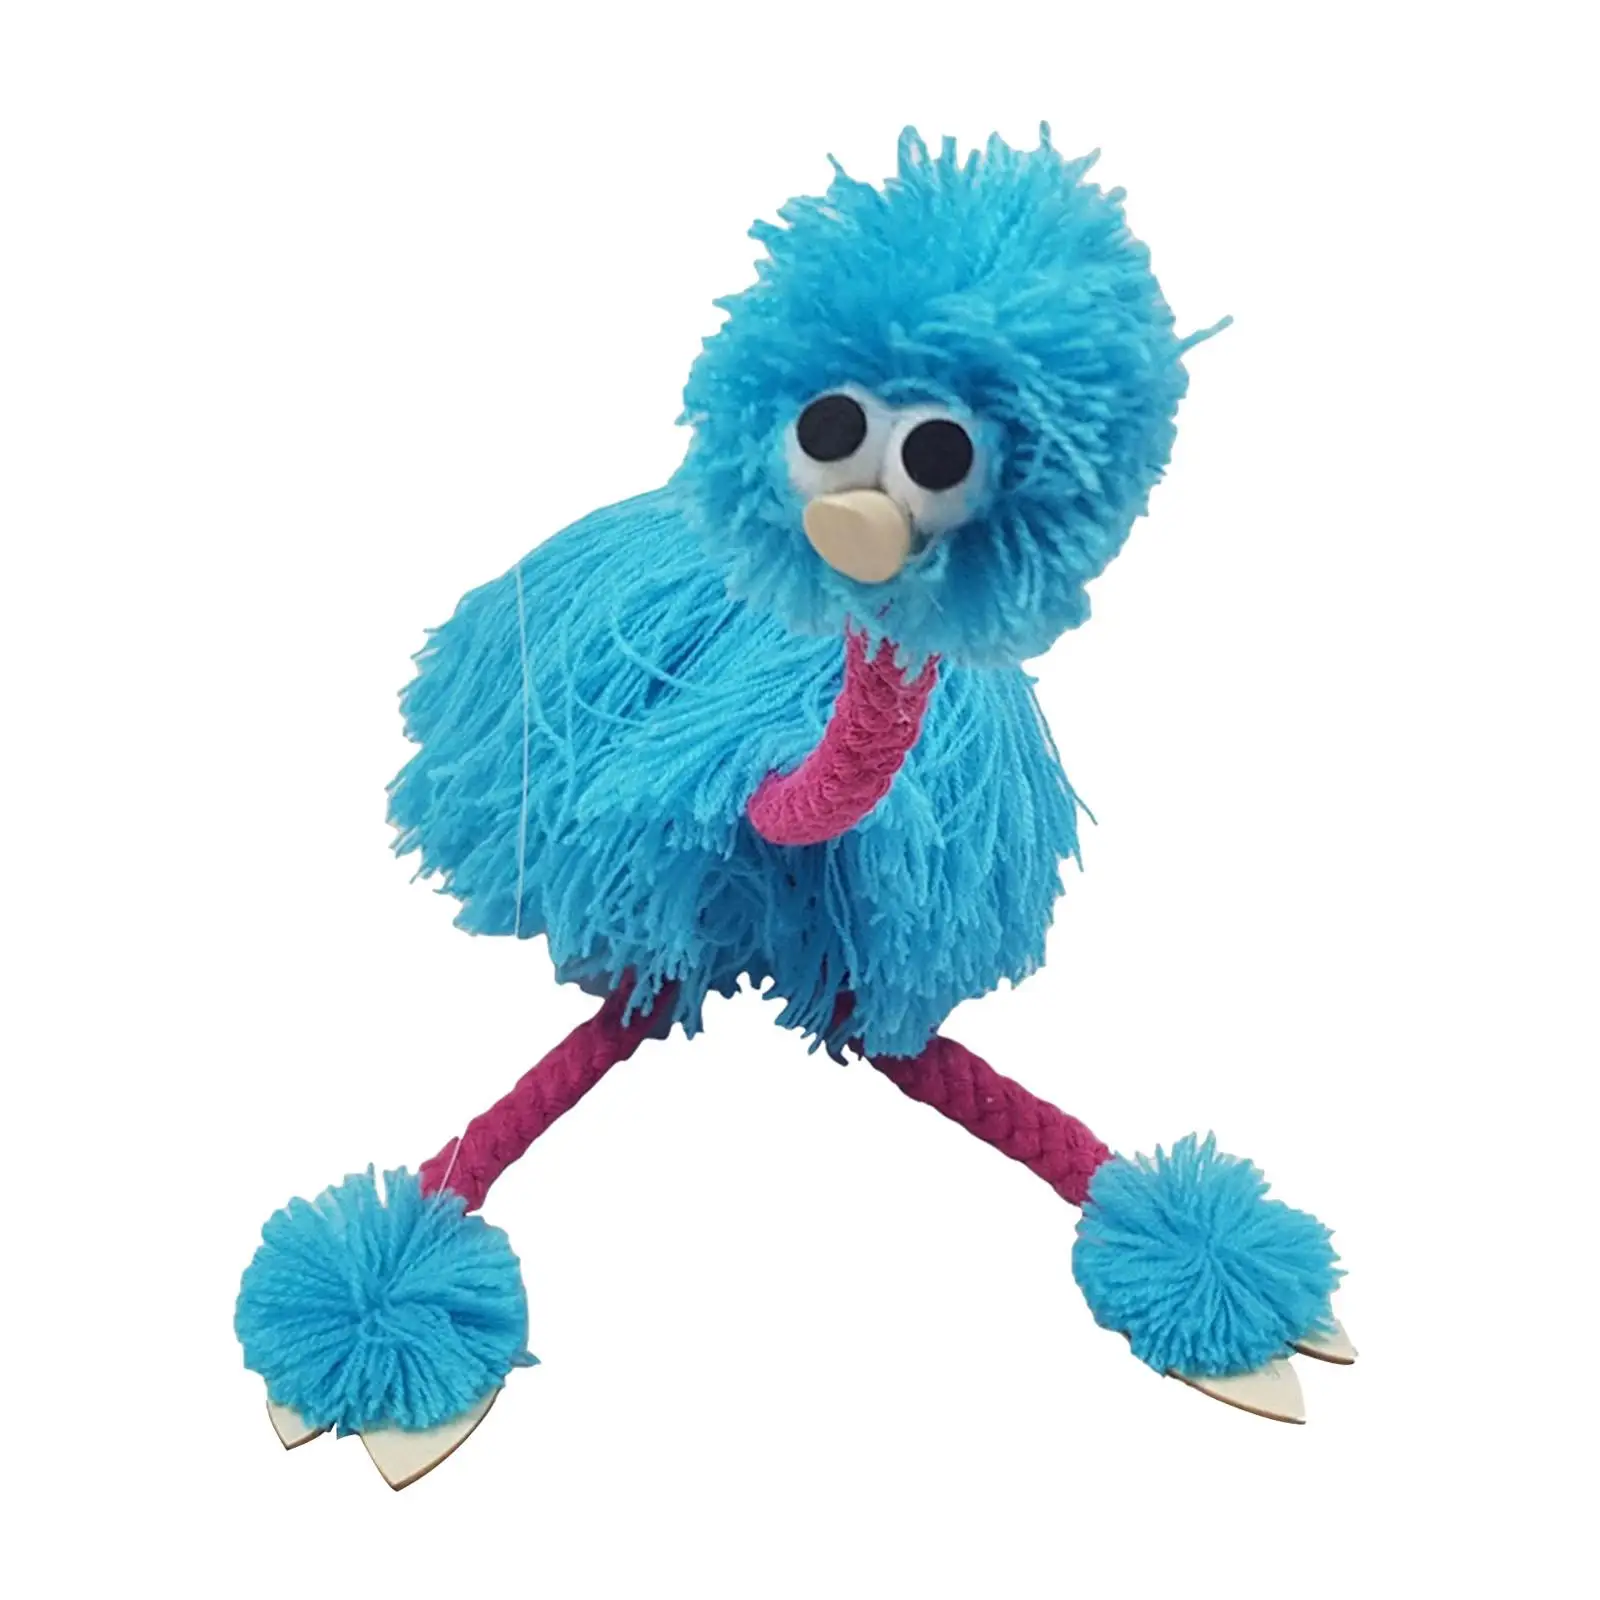 Cute Marionettes String Puppet Lovely Bird Animal Toy for Holiday Stage Performance Kids Gift Birthday ages 3 Years Old